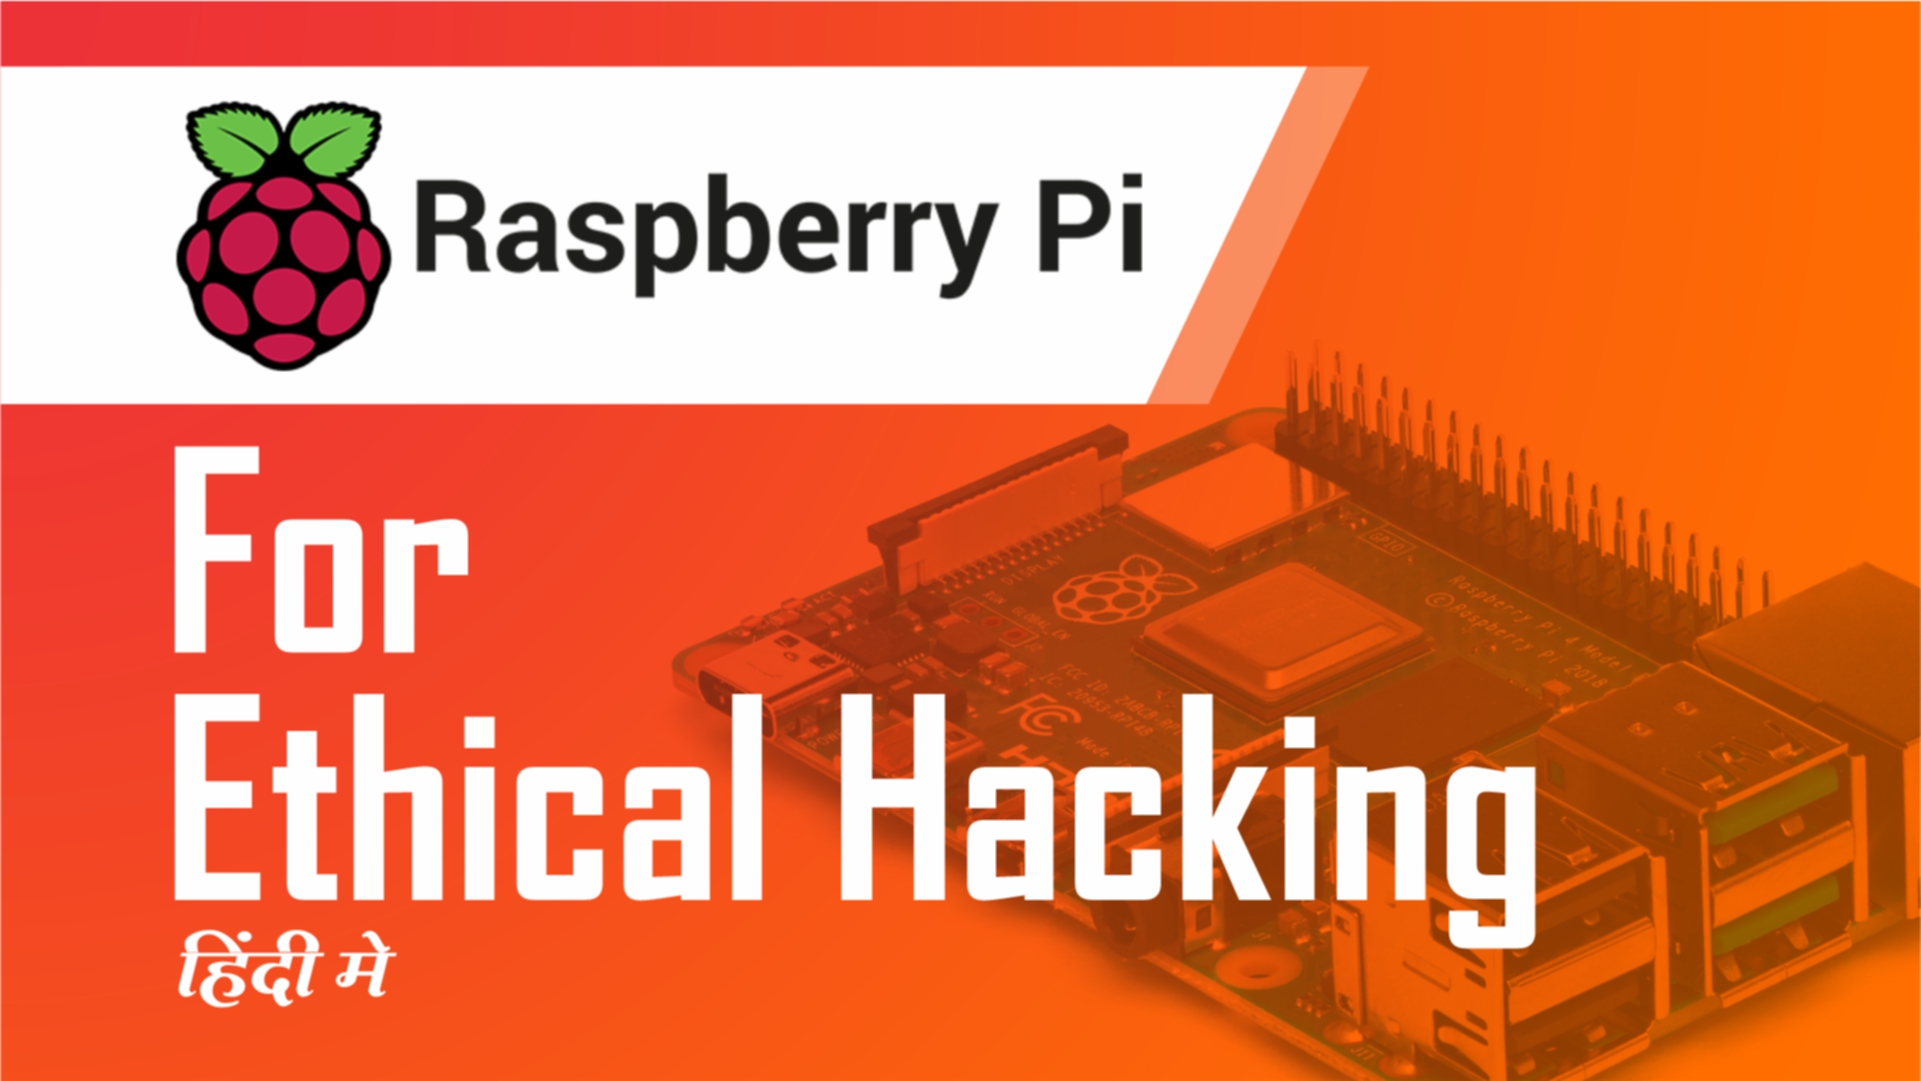 Raspberry pi for Ethical Hackers